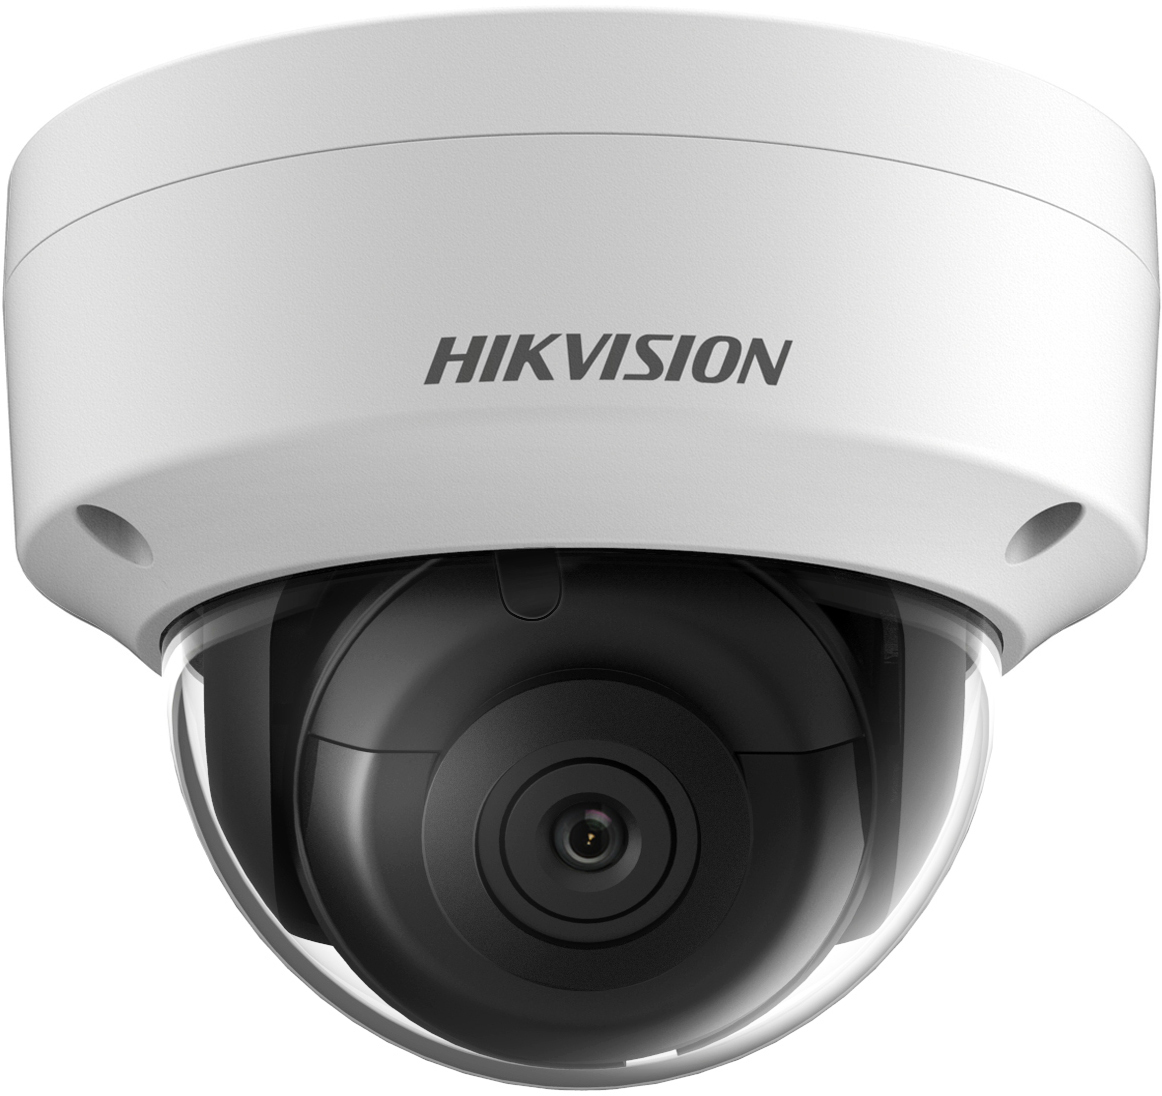 ip dome camera with audio